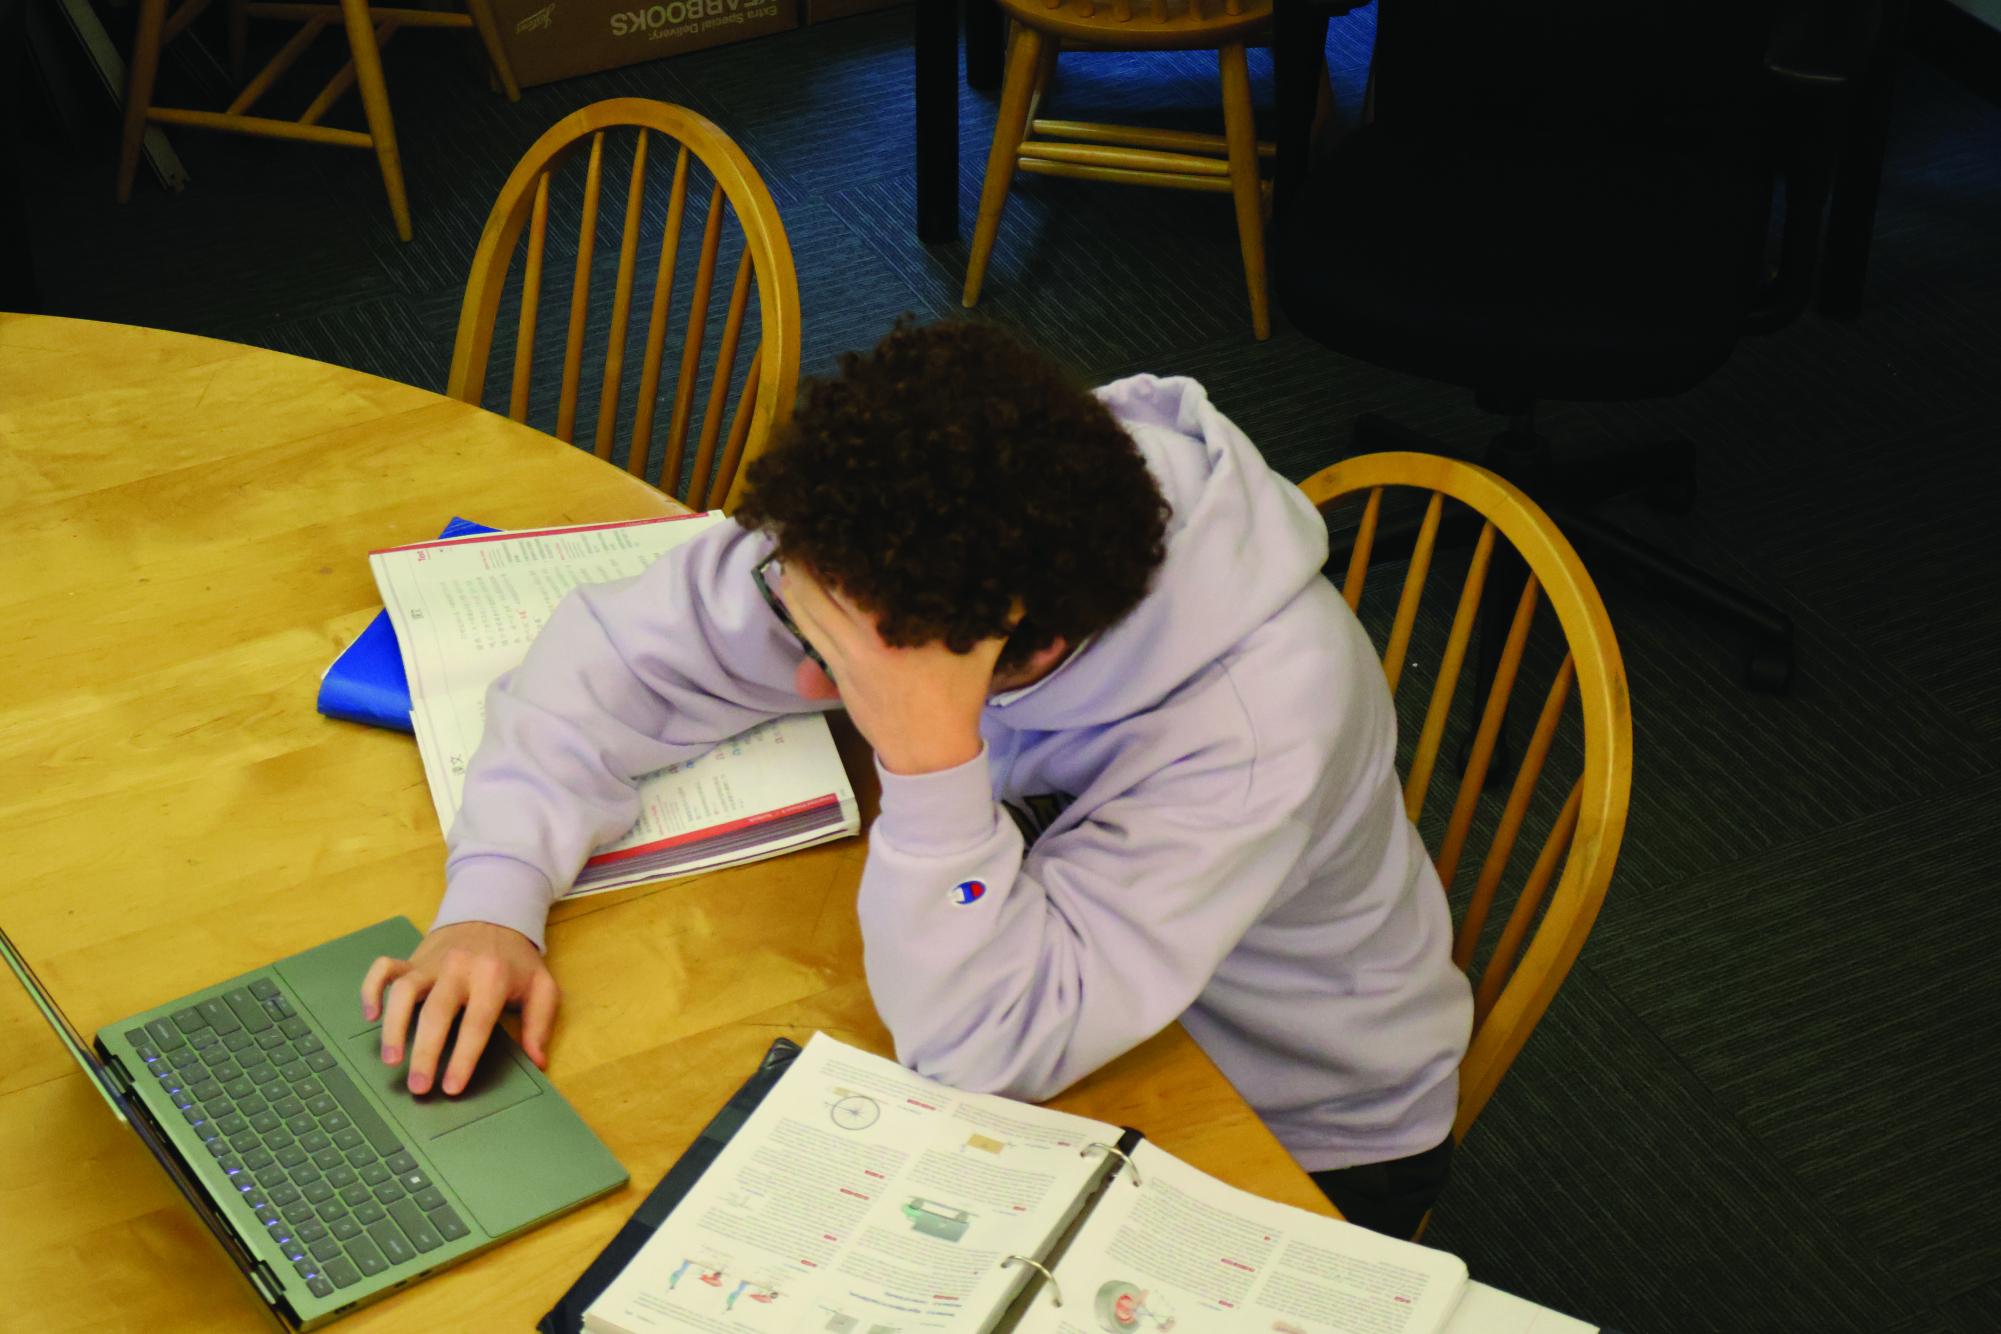 BURNT OUT With many students struggling to manage their time effectively, they can often run into late nights of homework and studying. Without the ability to handle work ahead of time, students feel the effects of procrastination as assignments and assessments pile up, which can lead to poor academic performance and mental health.